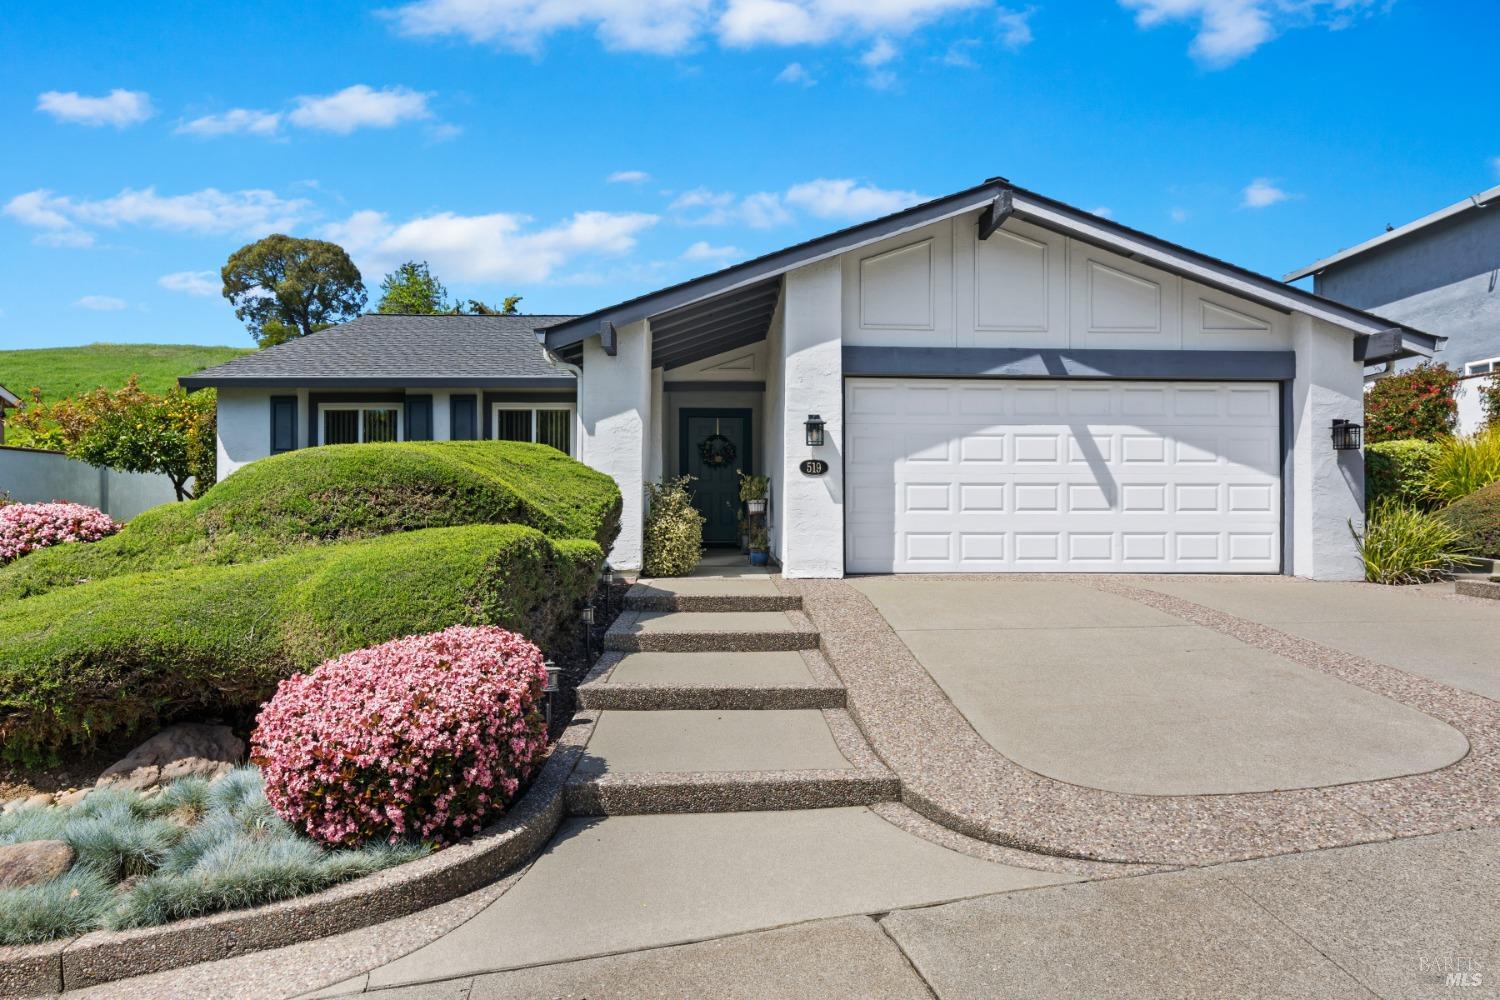 Photo of 519 Hastings Dr in Benicia, CA